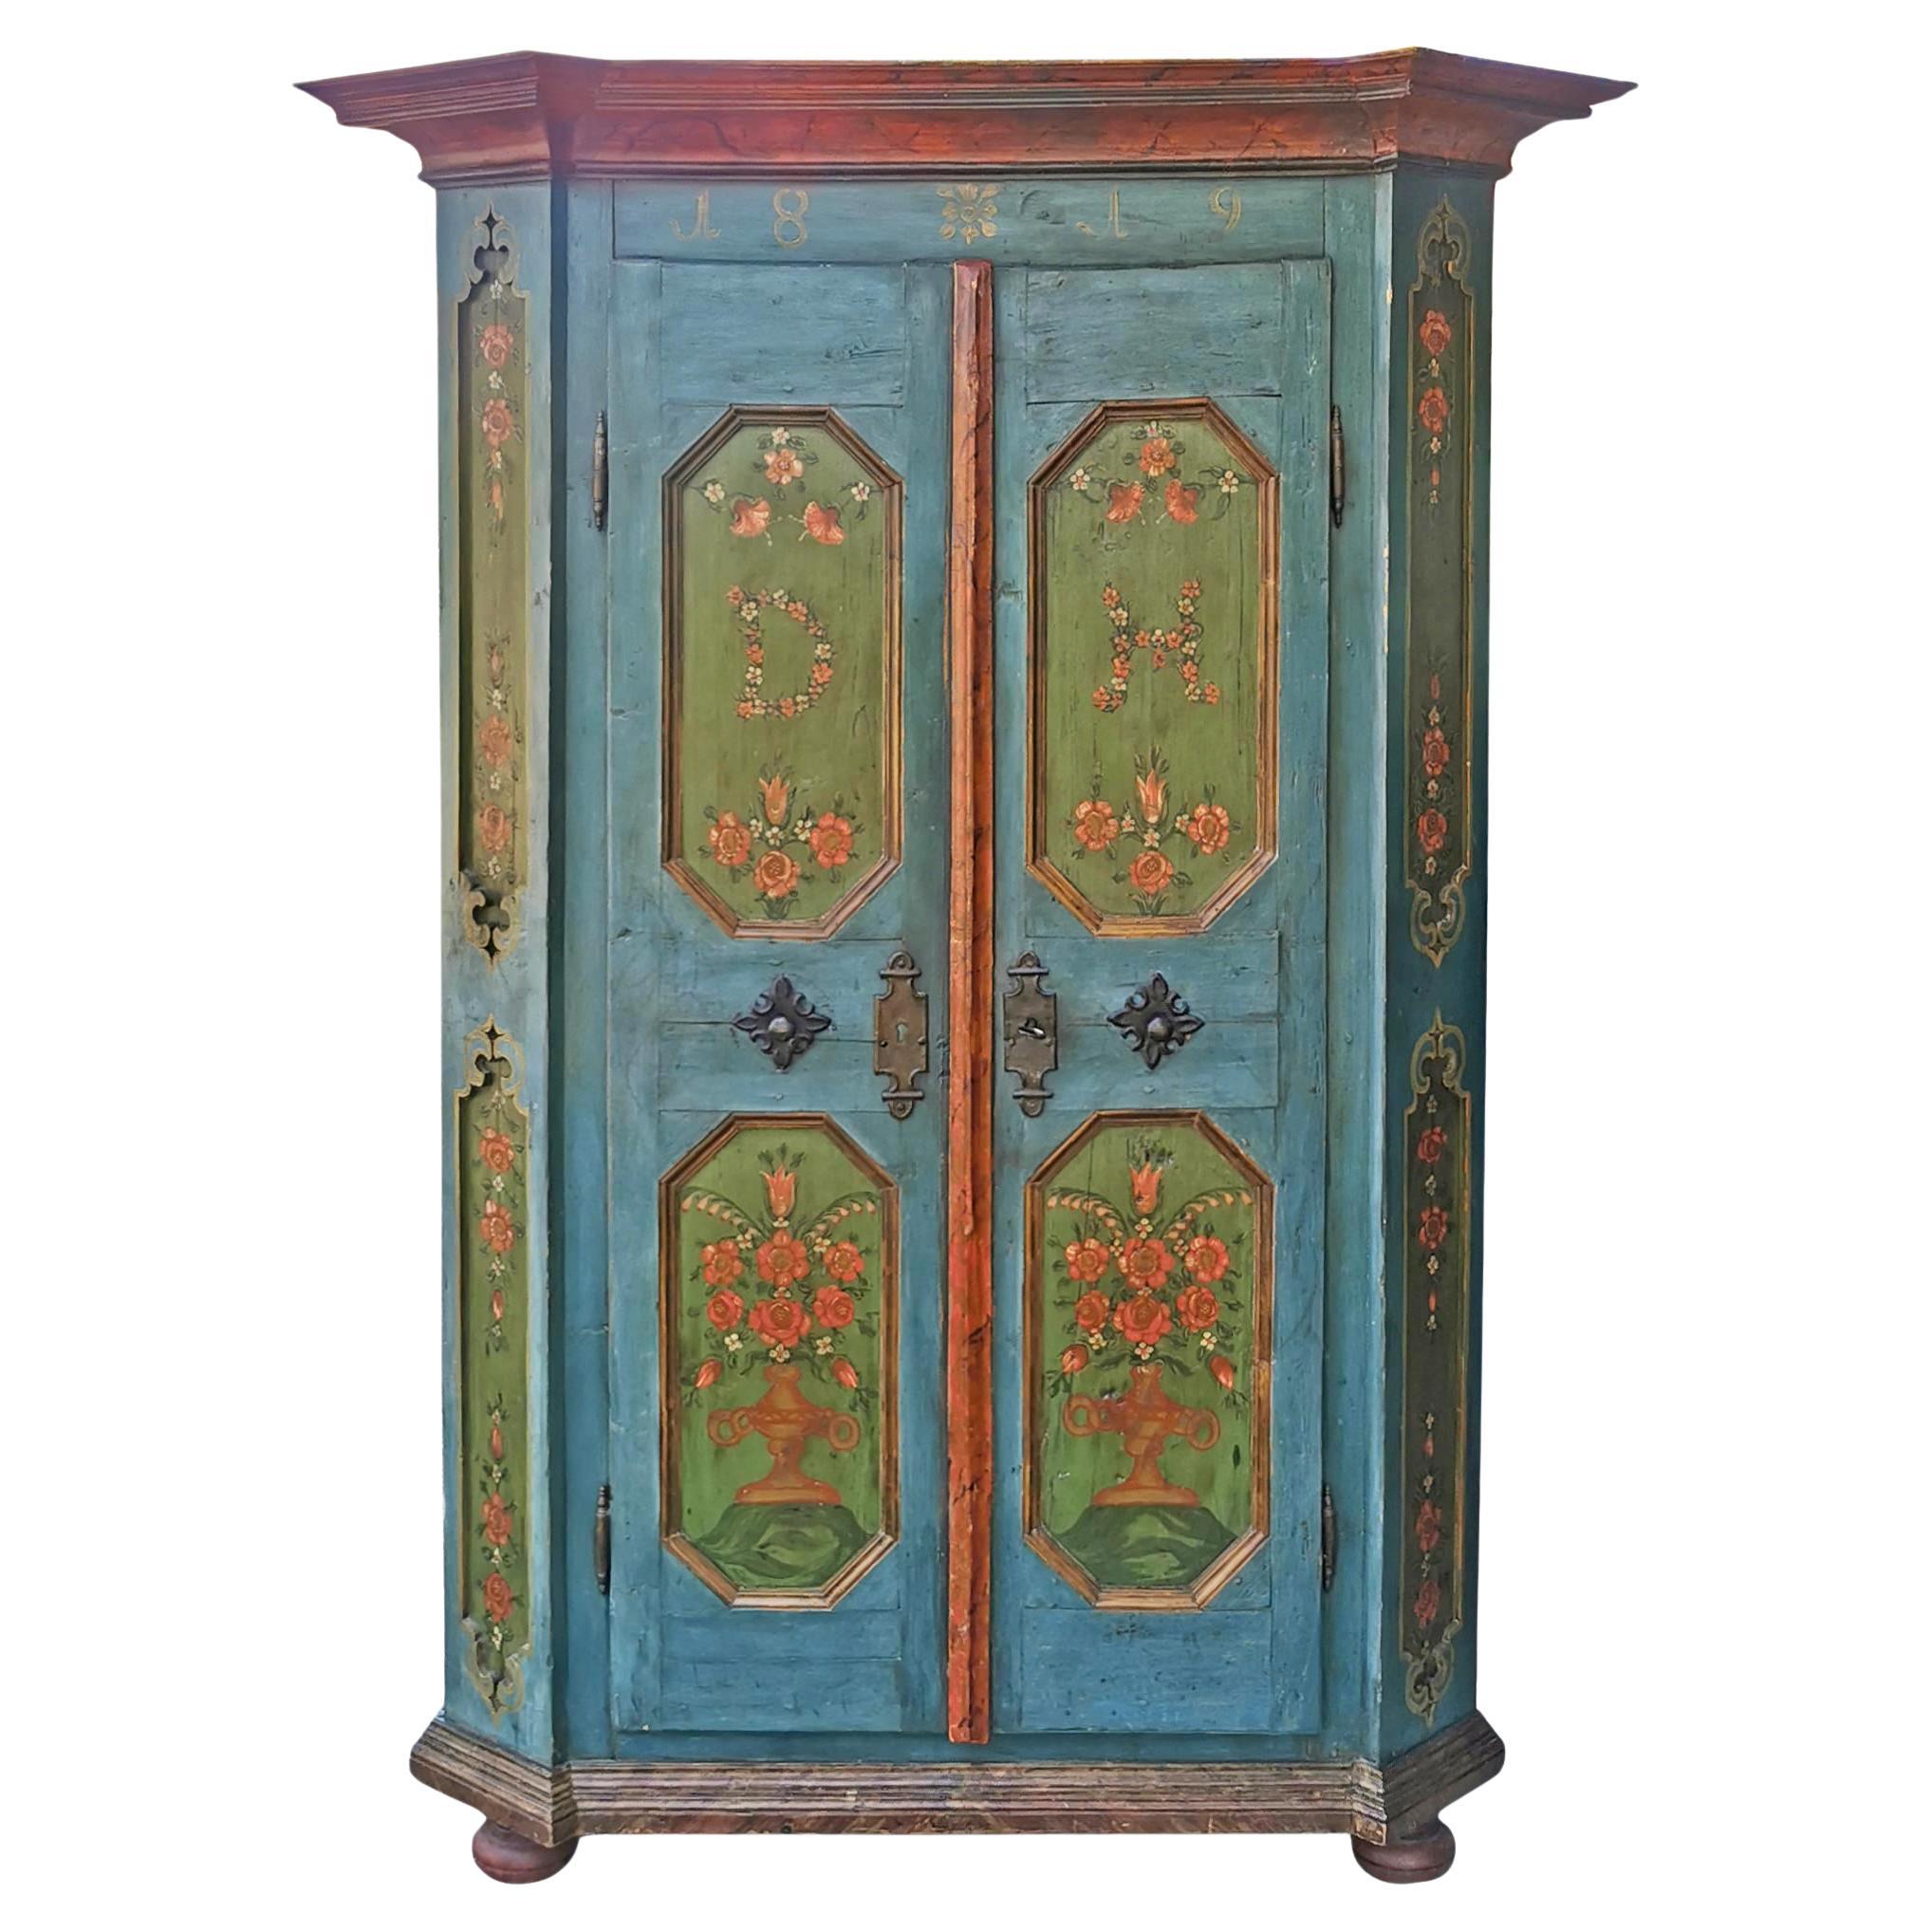 1819 Blu Floral Painted Cabinet, Central Europe